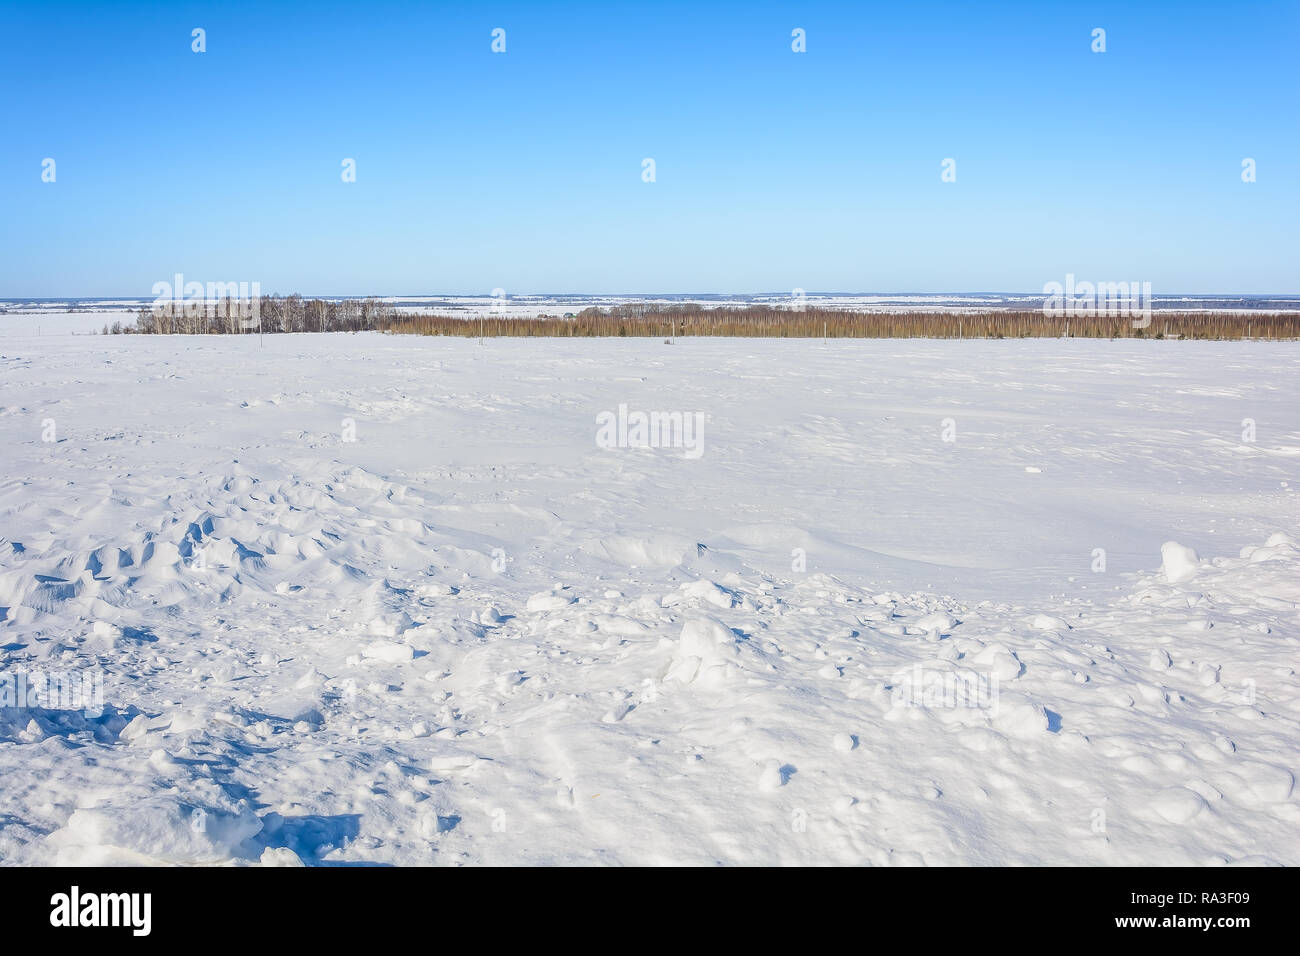 Snow-covered field in winter Stock Photo